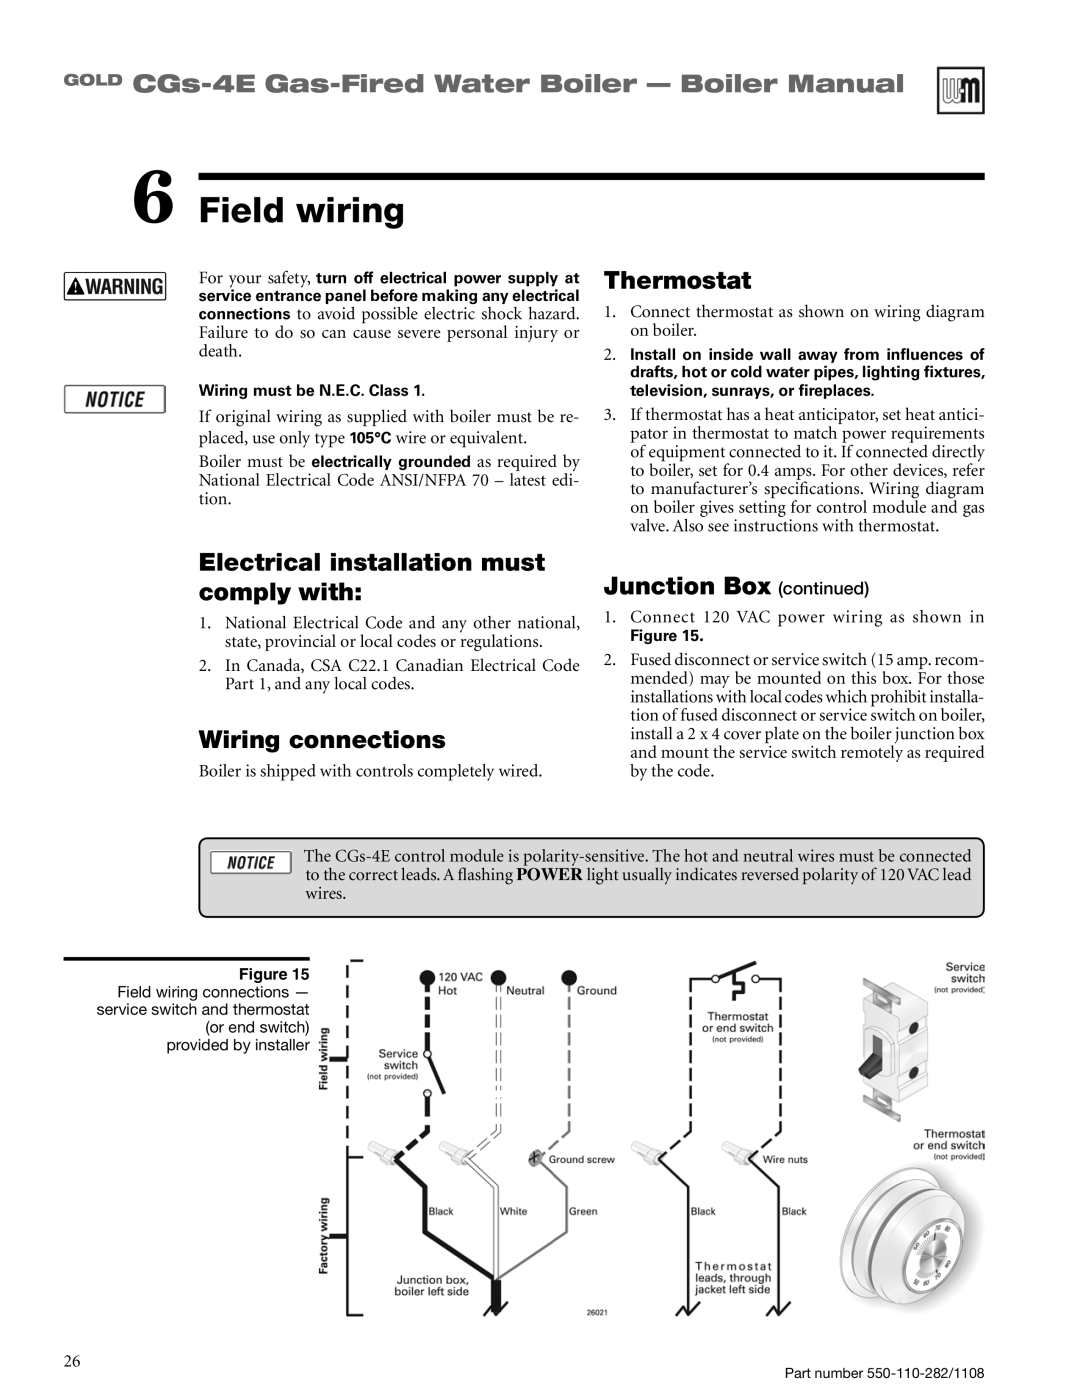 Weil-McLain CGS-4E manual Field wiring, Thermostat, Electrical installation must comply with, Wiring connections 